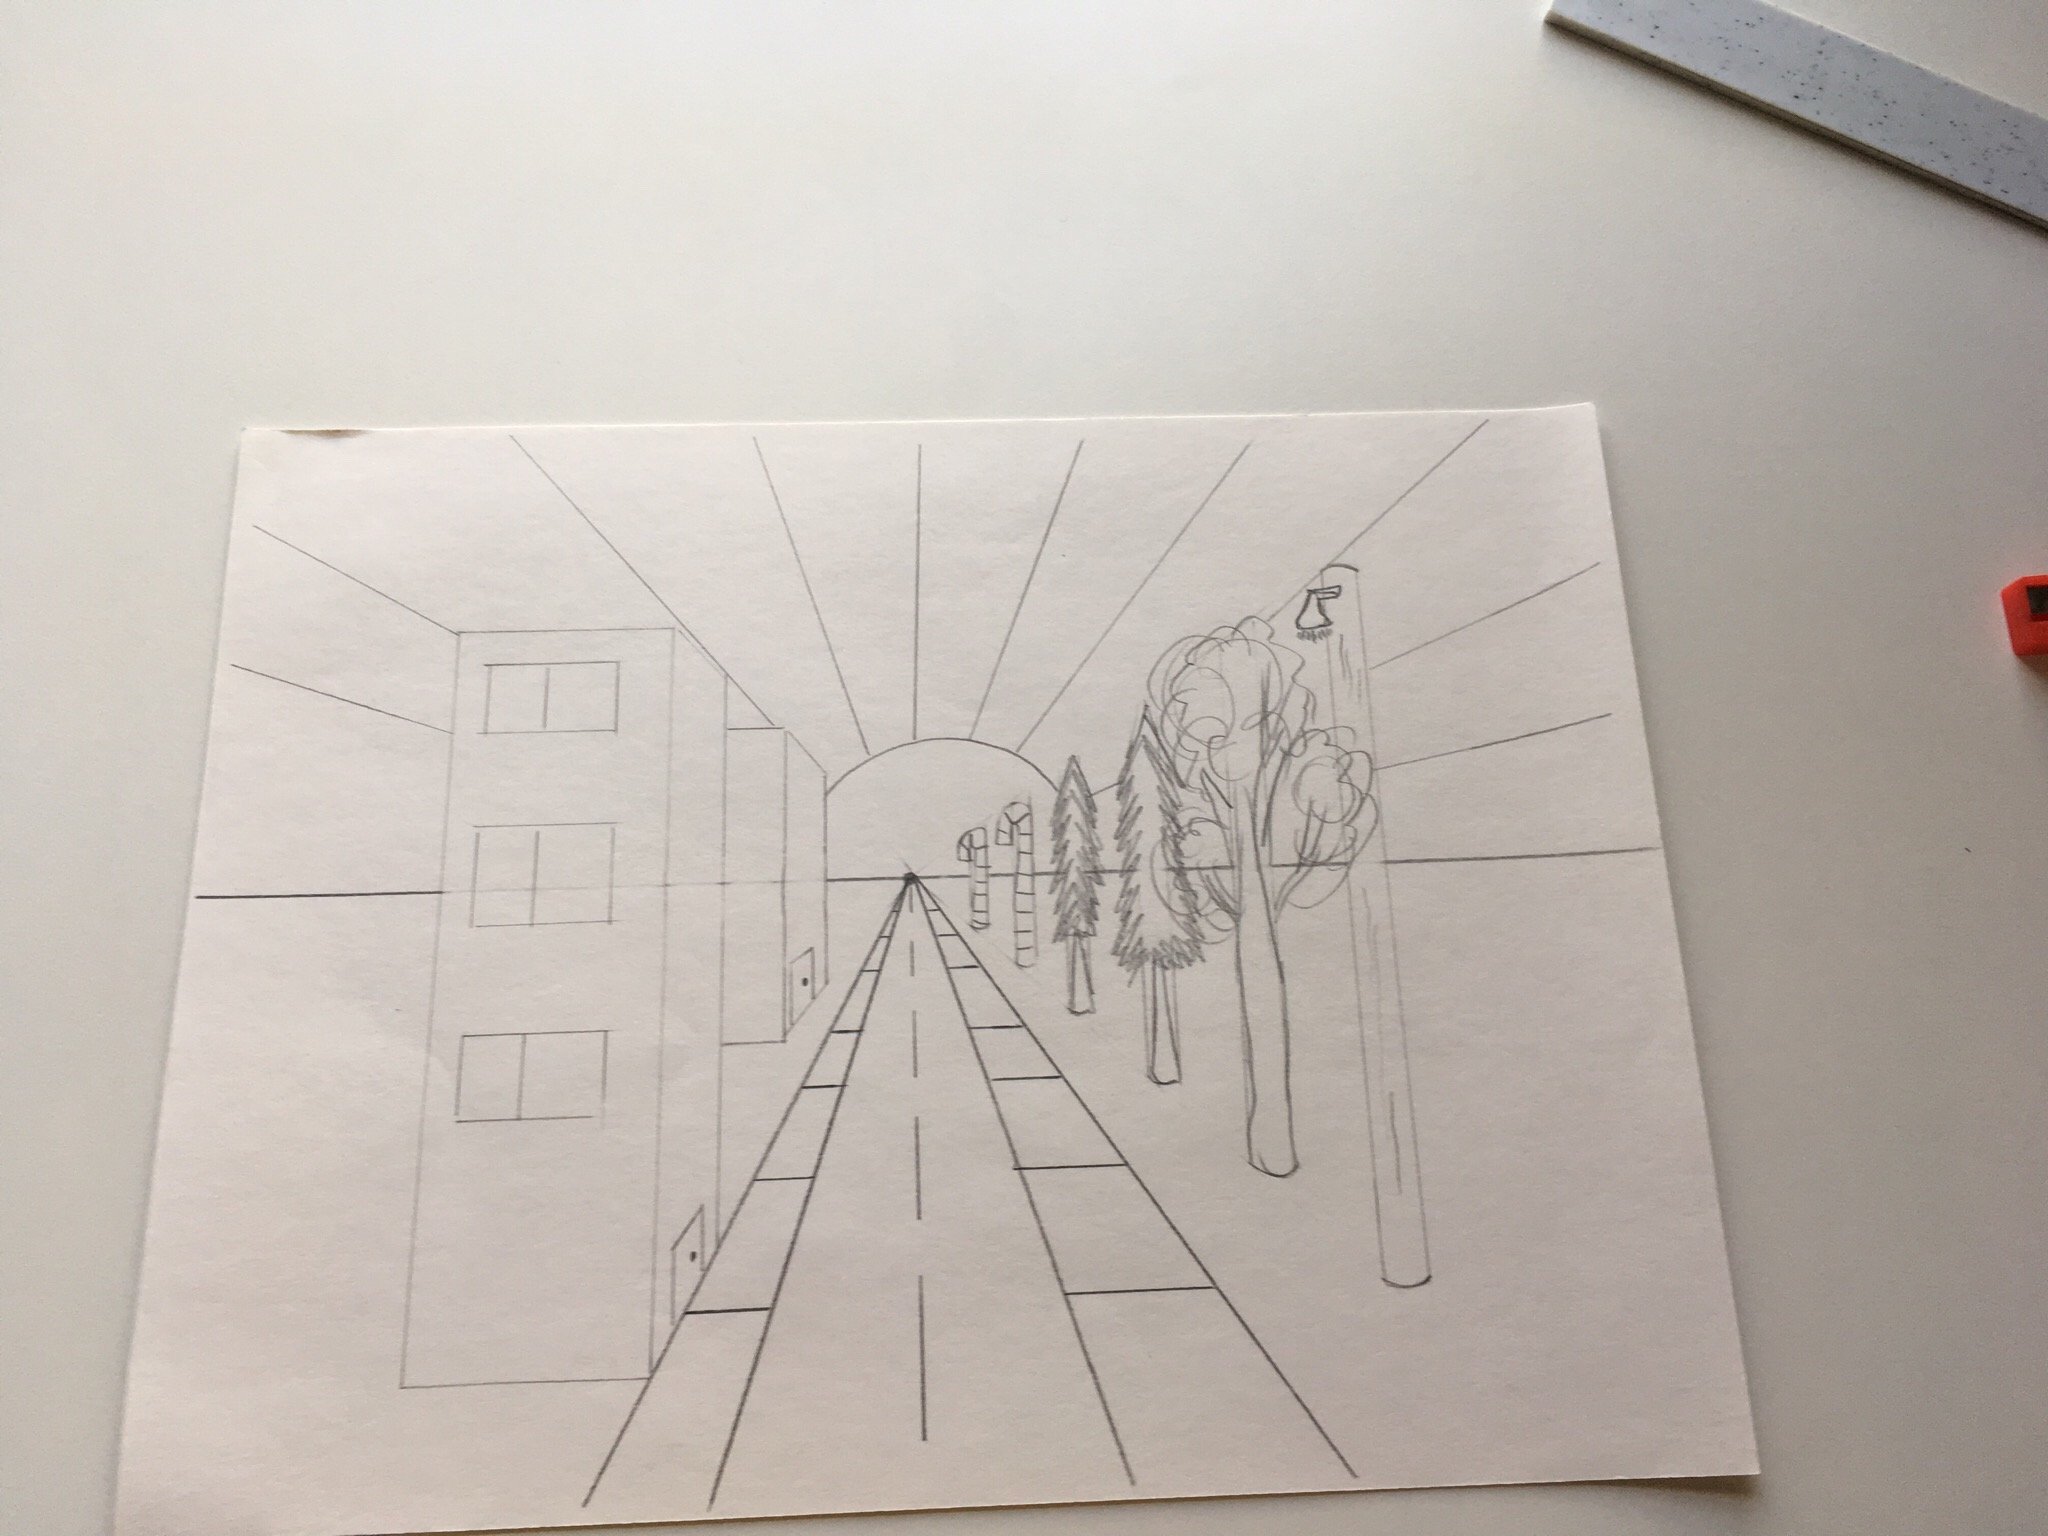 How to draw in one point perspective, a village road scenery